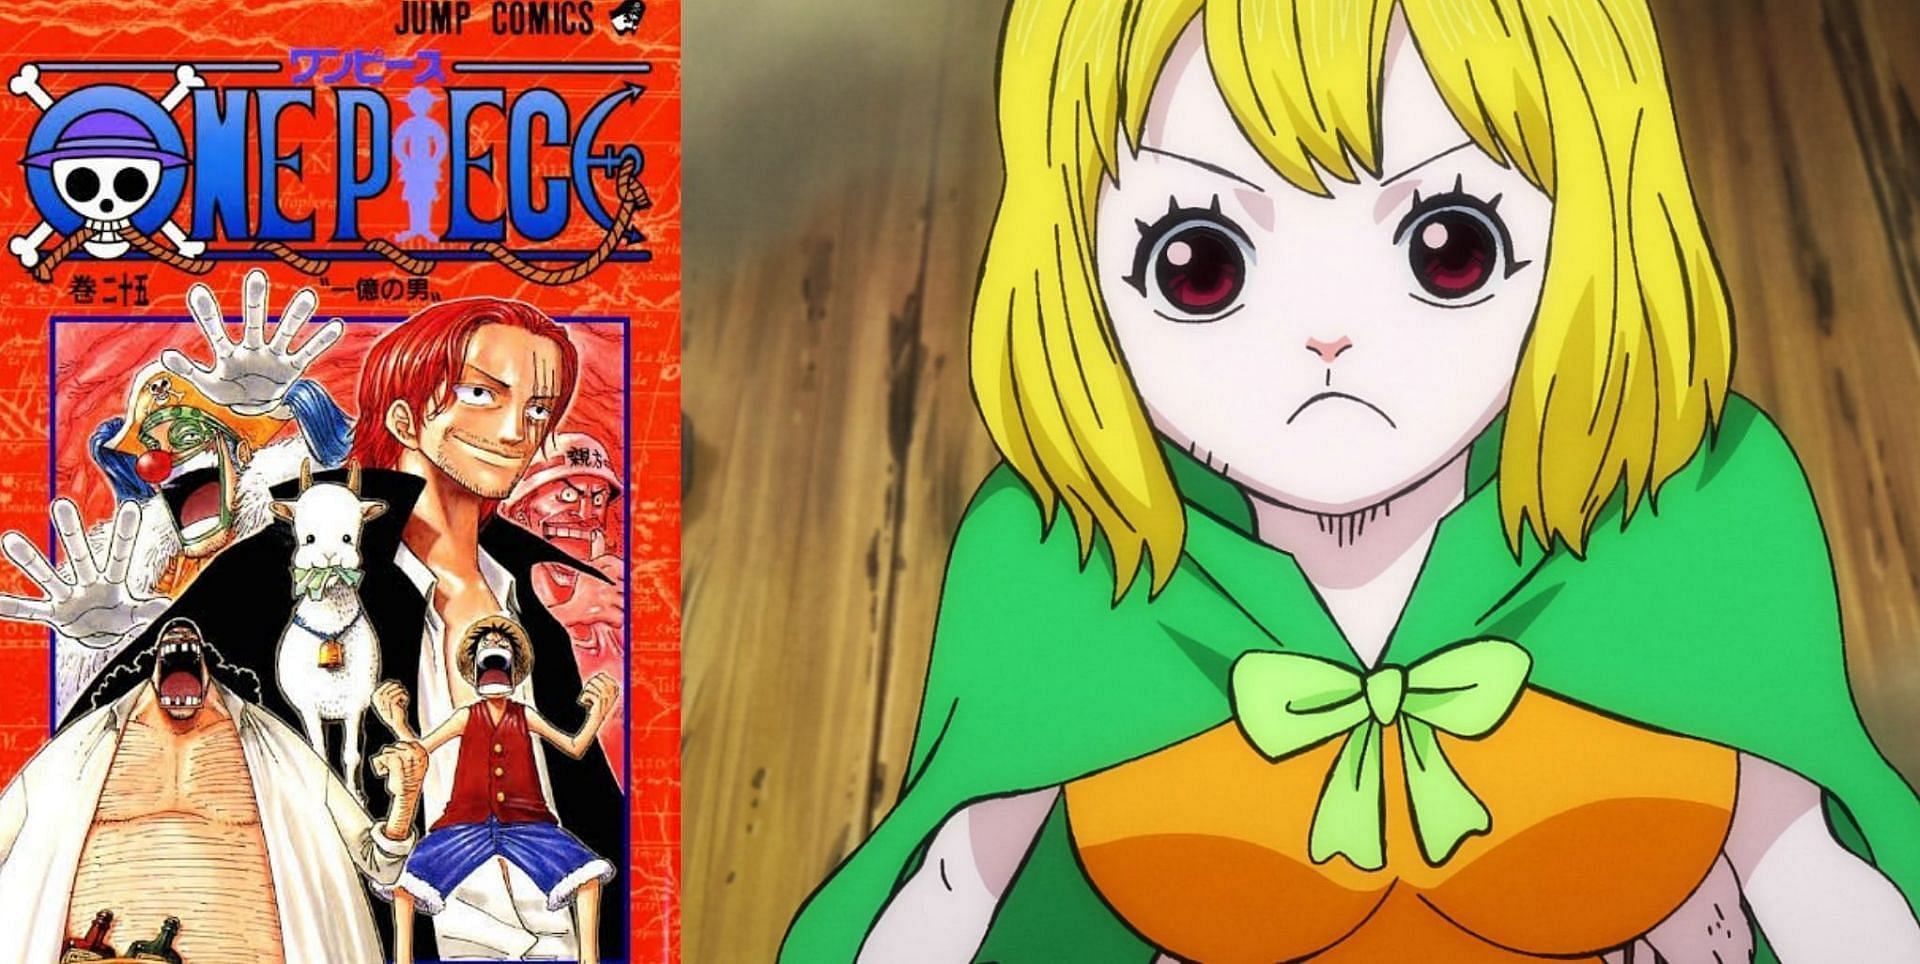 One Piece volume 105 cover features a surprising character